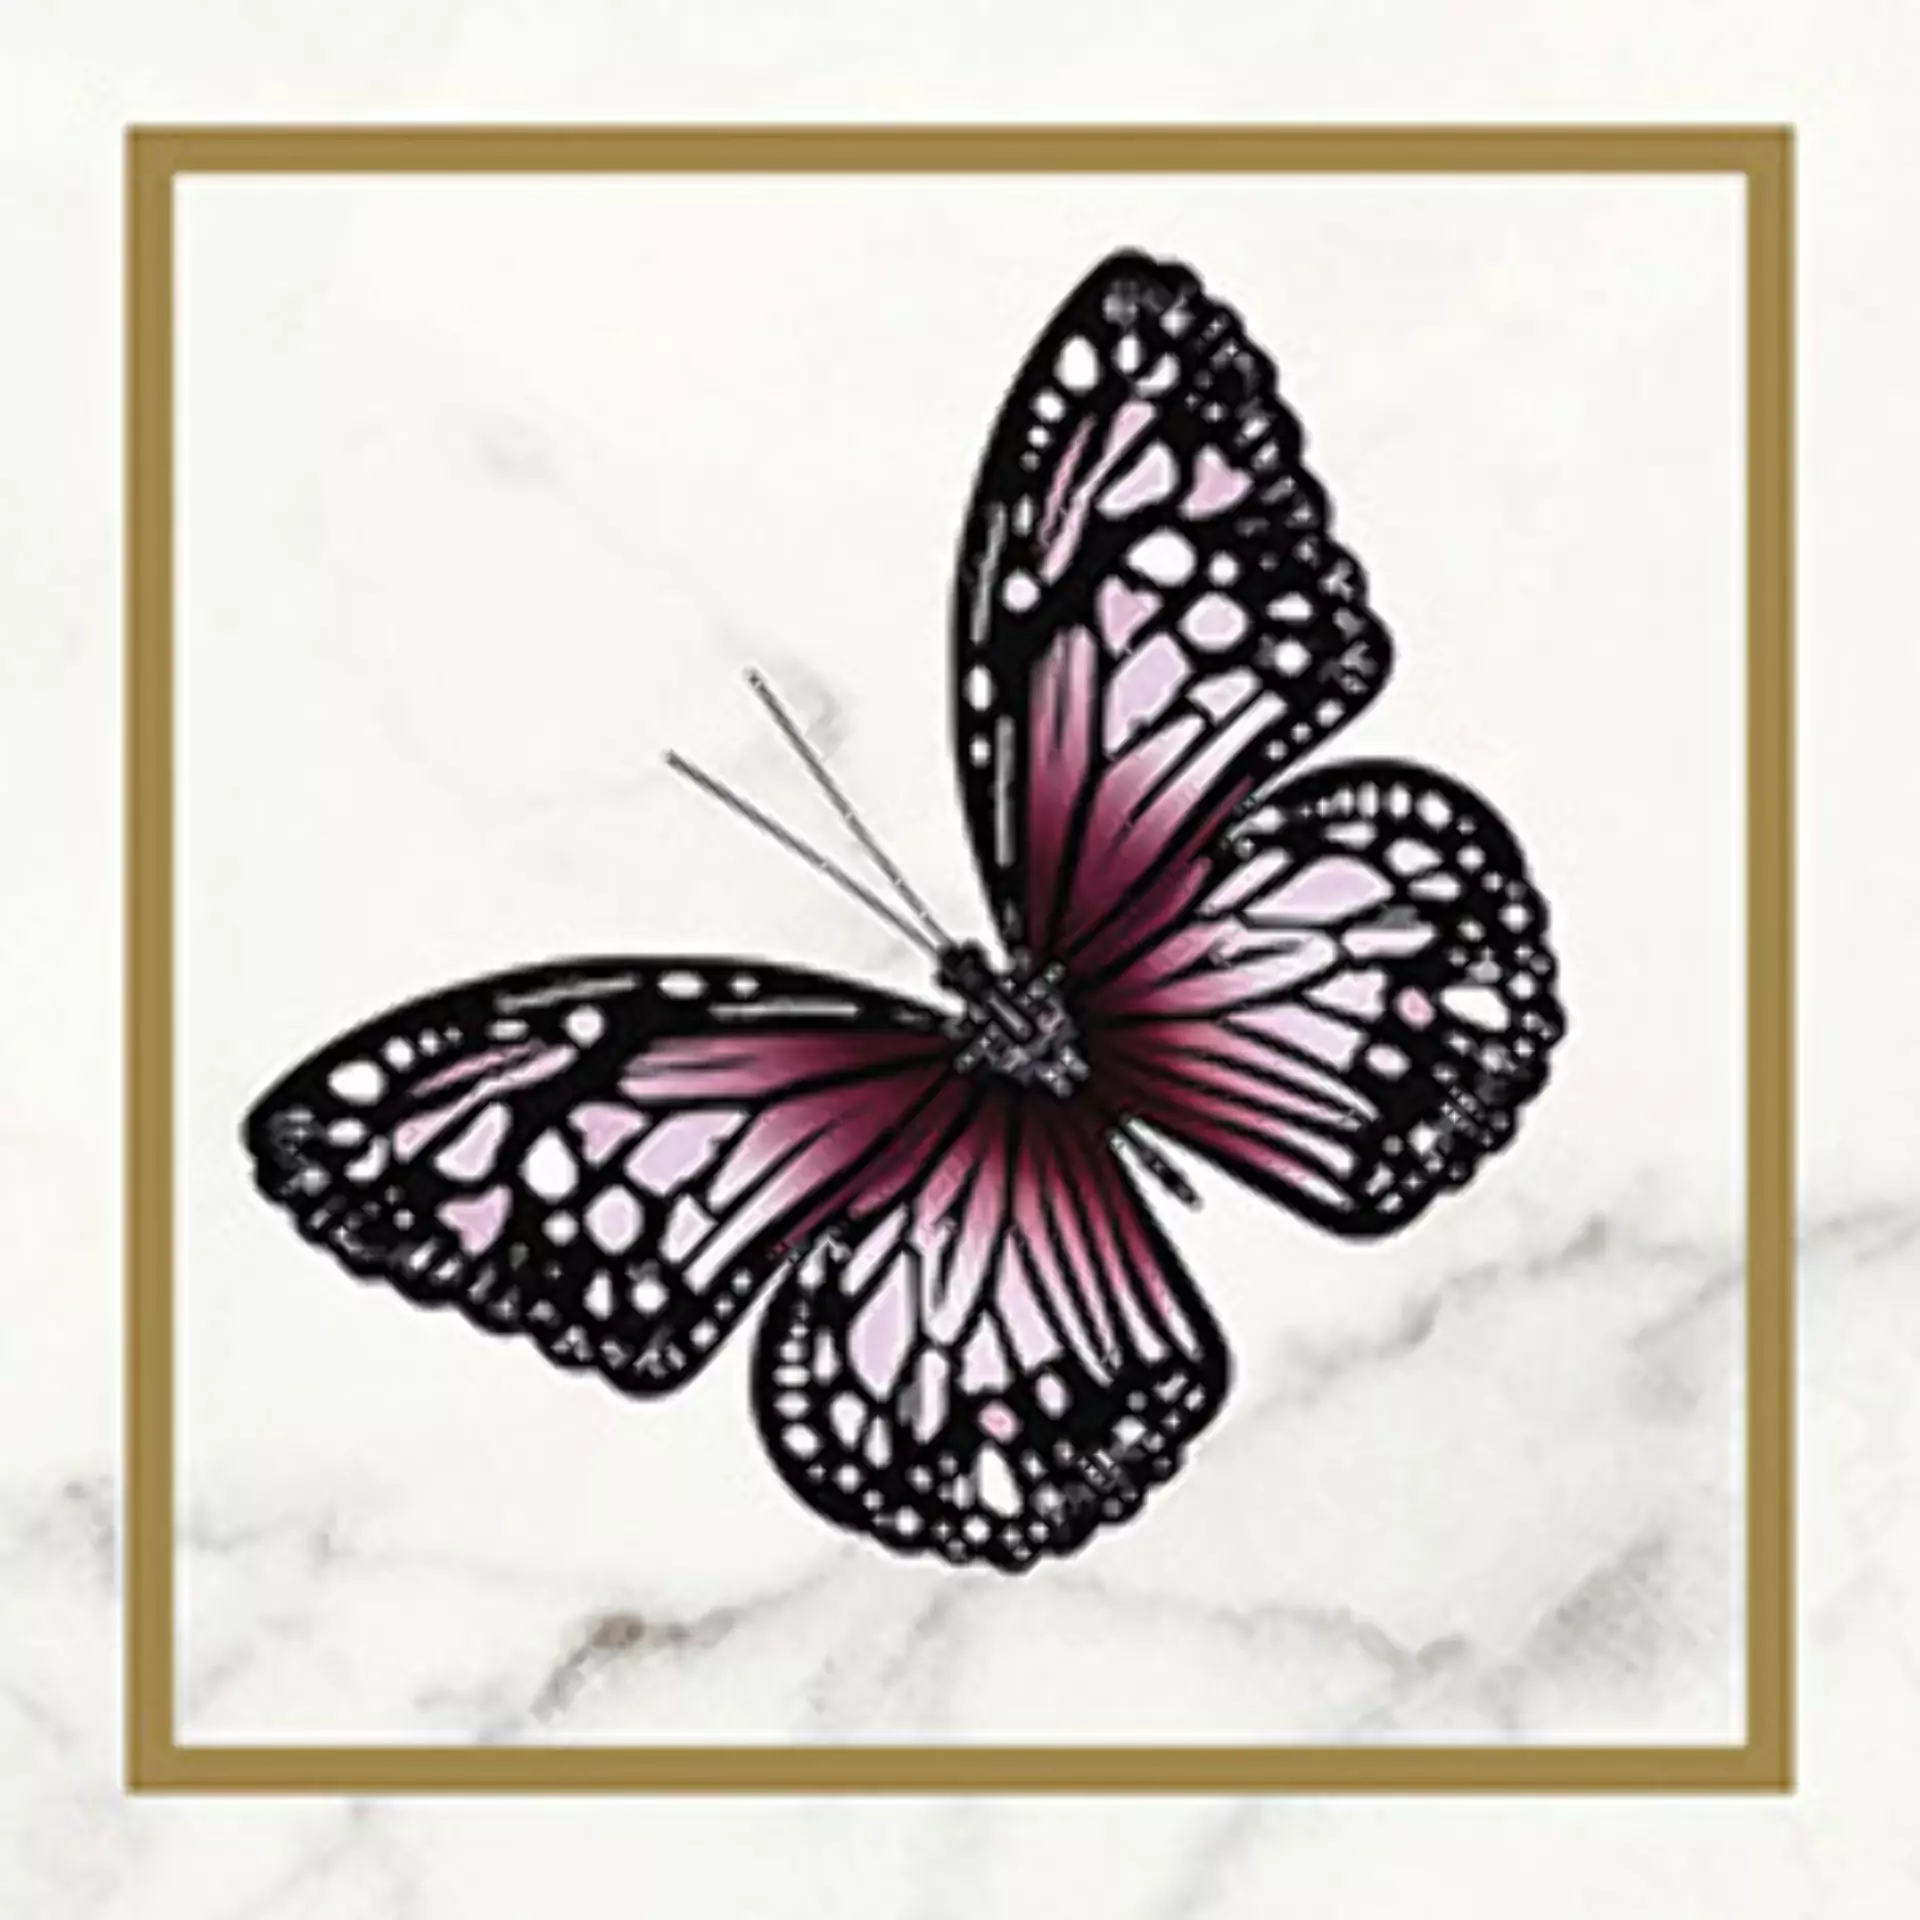 Villeroy & Boch Victorian White - Gold Glossy Decor Butterfly 45 1222-MK0F 20x20cm rectified 10mm